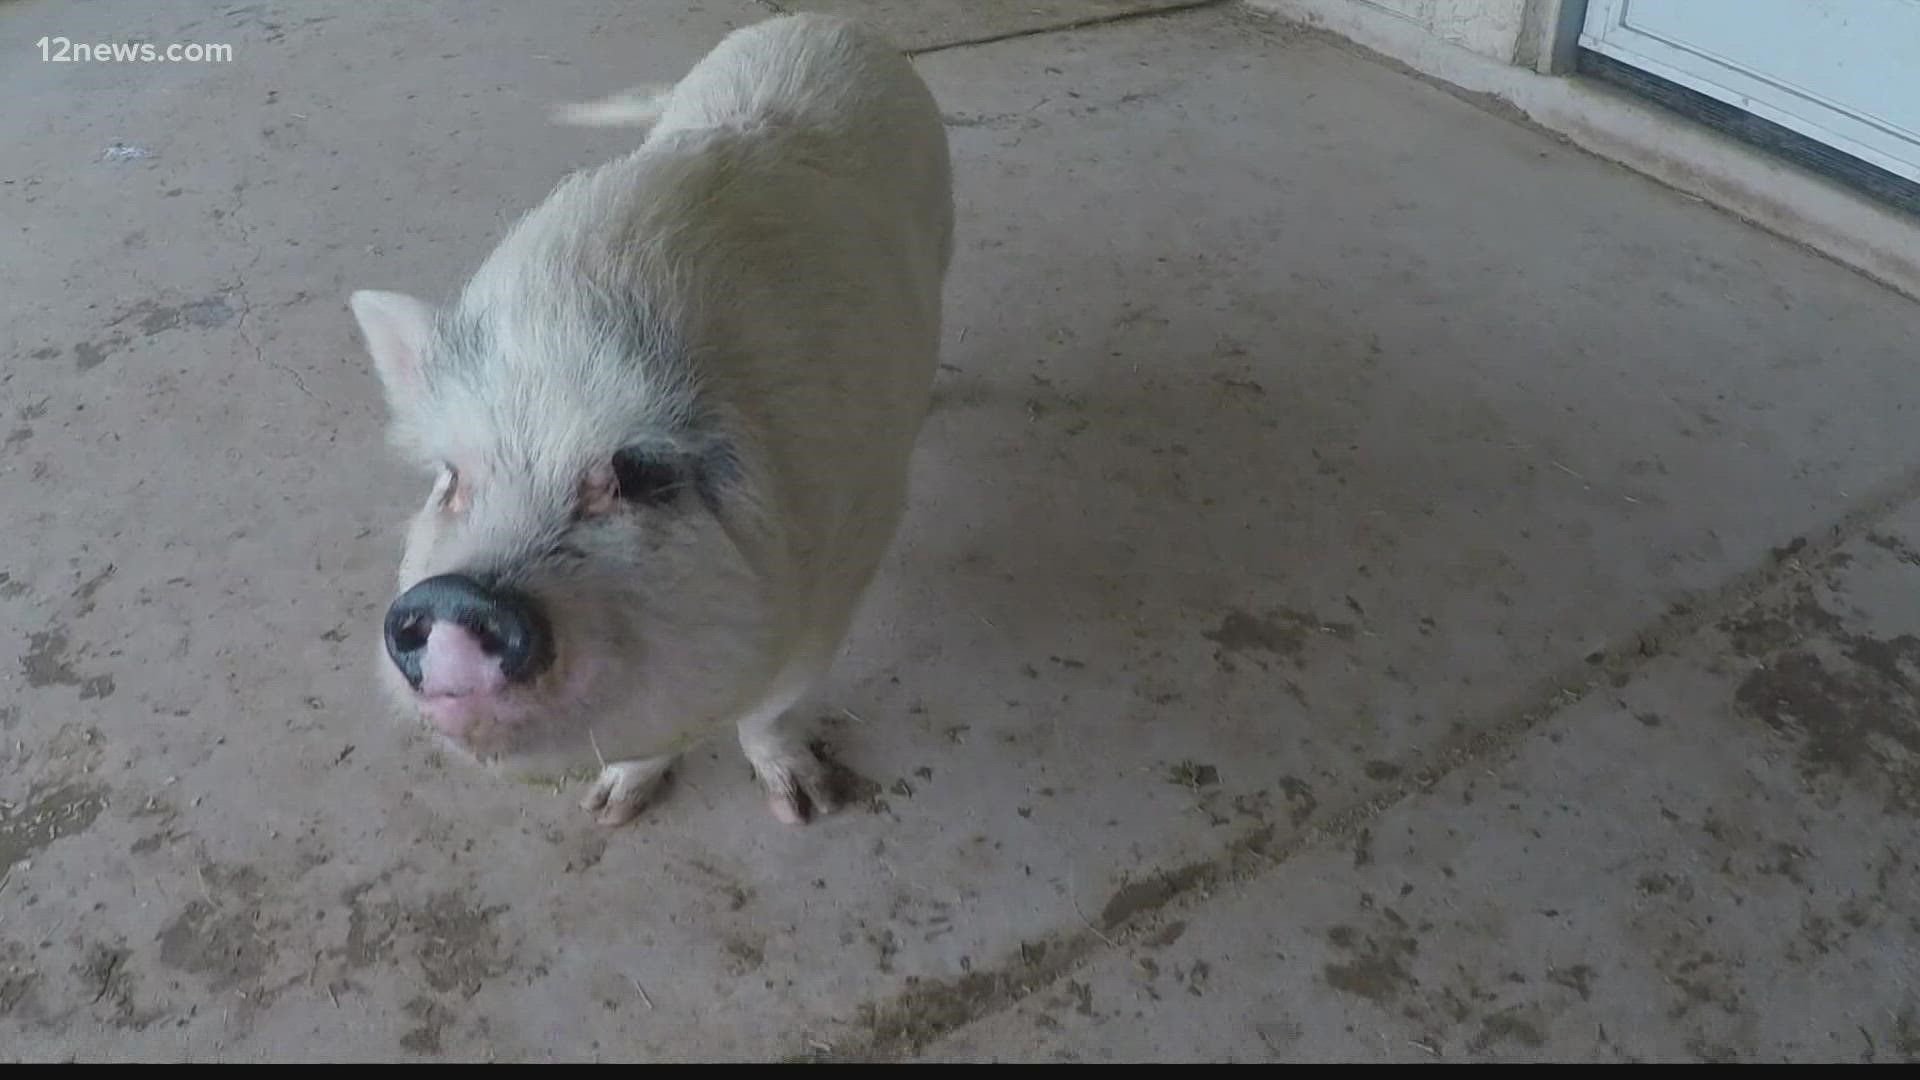 Better Piggies Rescue in New River had to close tours due to the COVID-19 pandemic, but have since reopened to let the public see the loving animals.